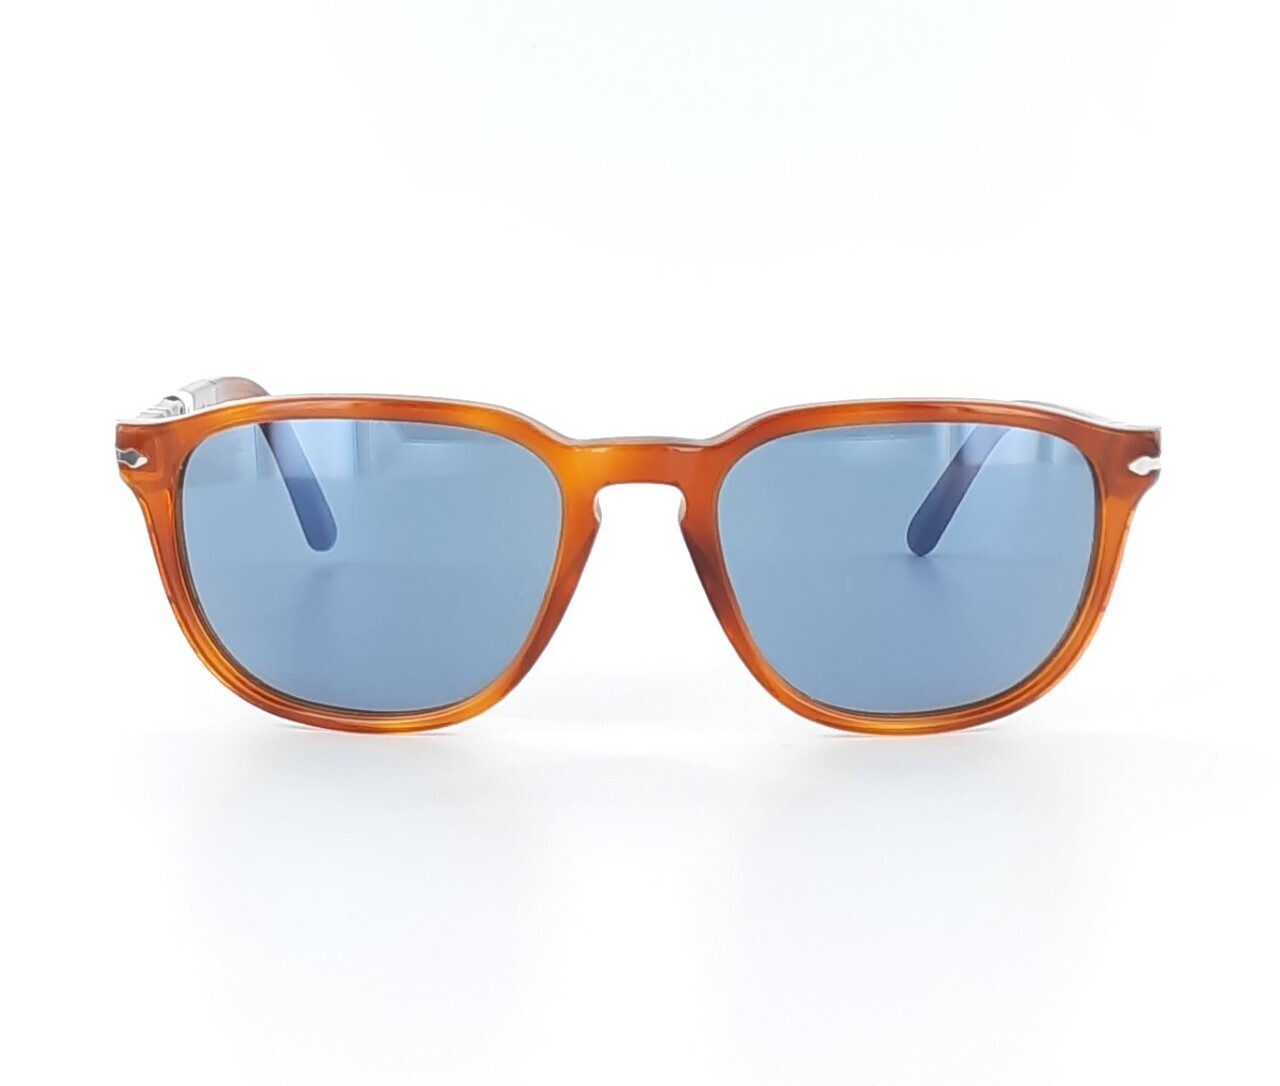 Persol 3019S 96/56 55 18